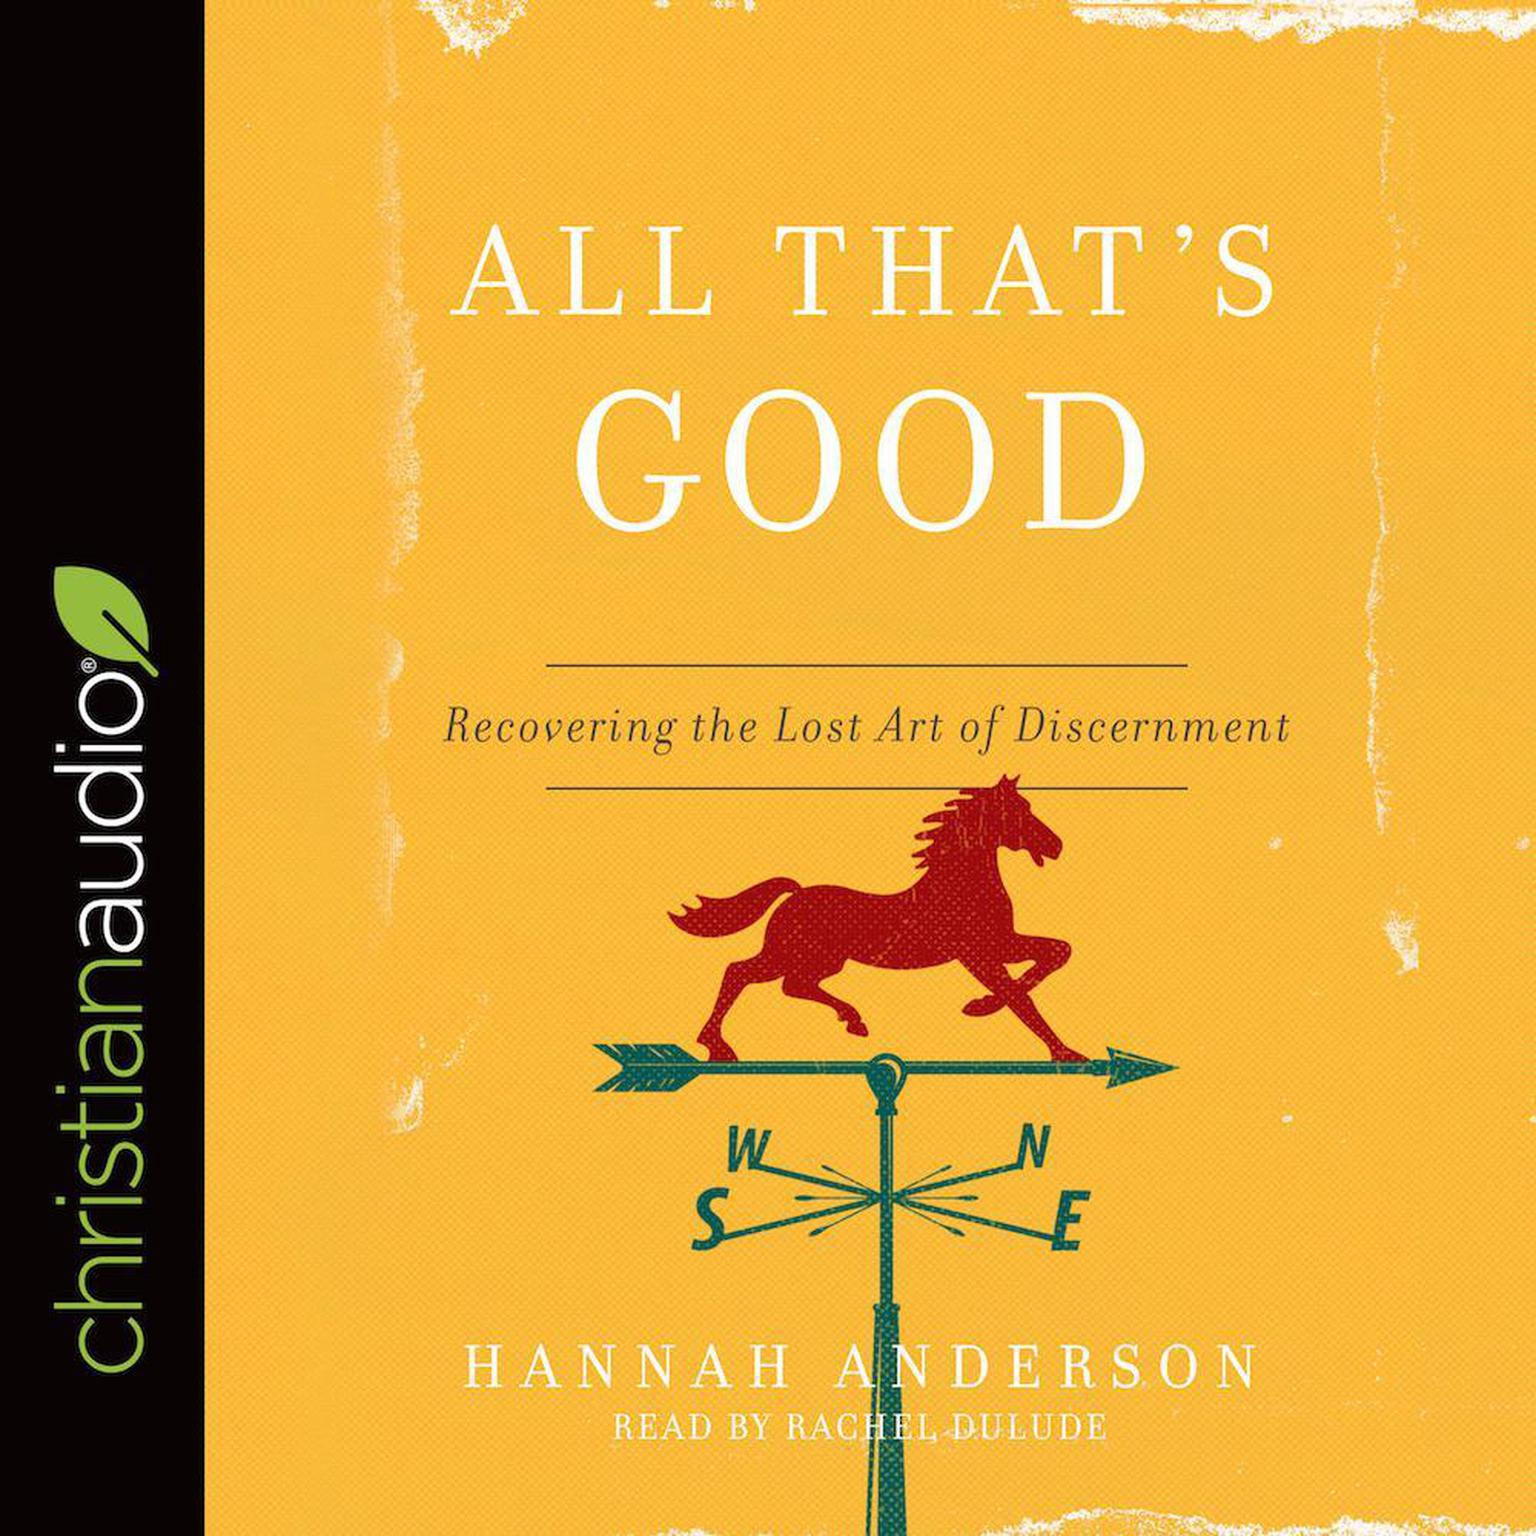 All Thats Good: Recovering the Lost Art of Discernment Audiobook, by Hannah Anderson